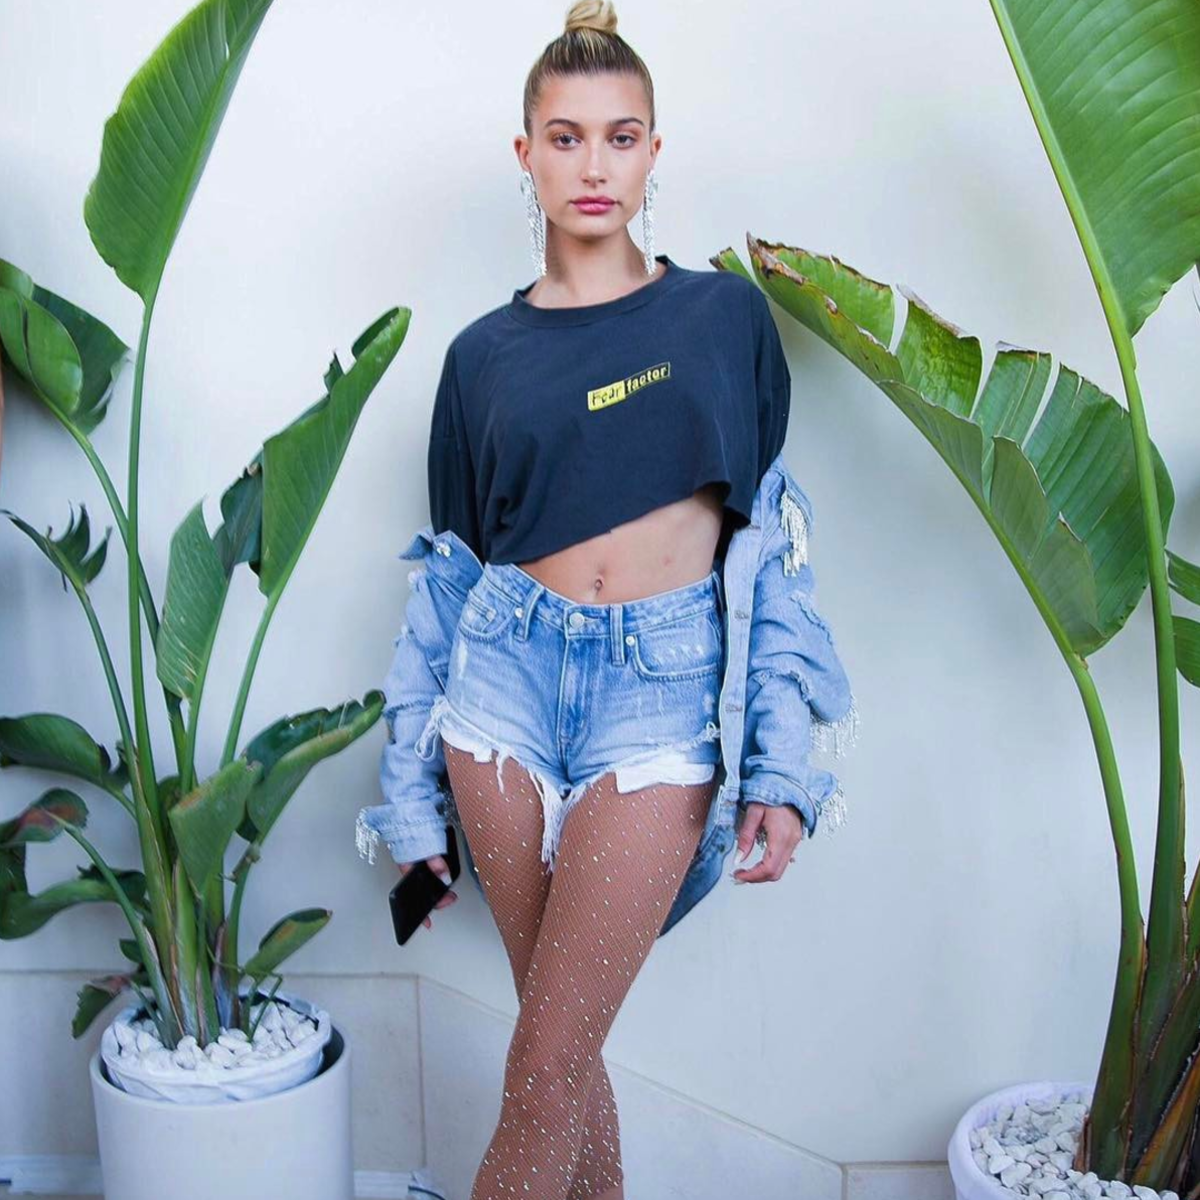 Hailey Baldwin Avoids Facials, Freezes Instead in the Name of Beauty